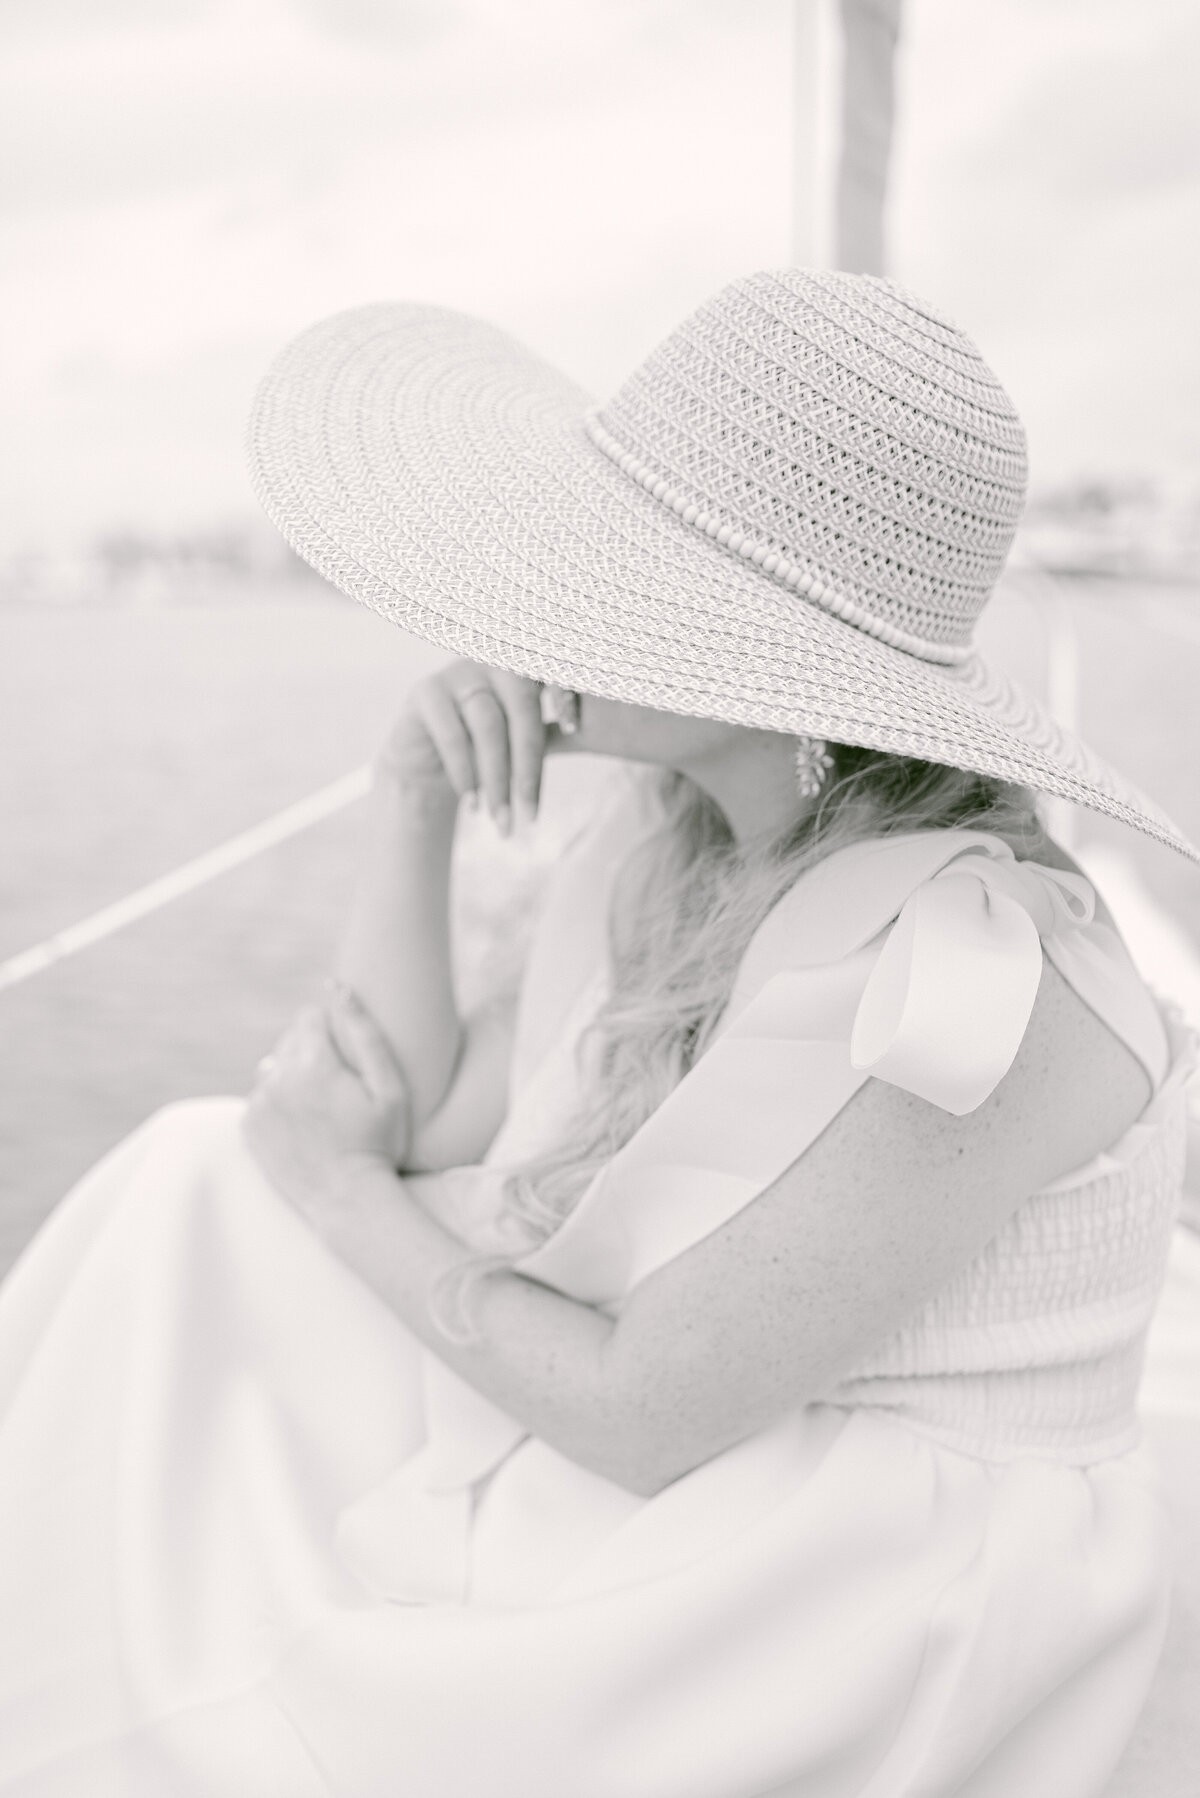 Lady wearing a sunhat looking away